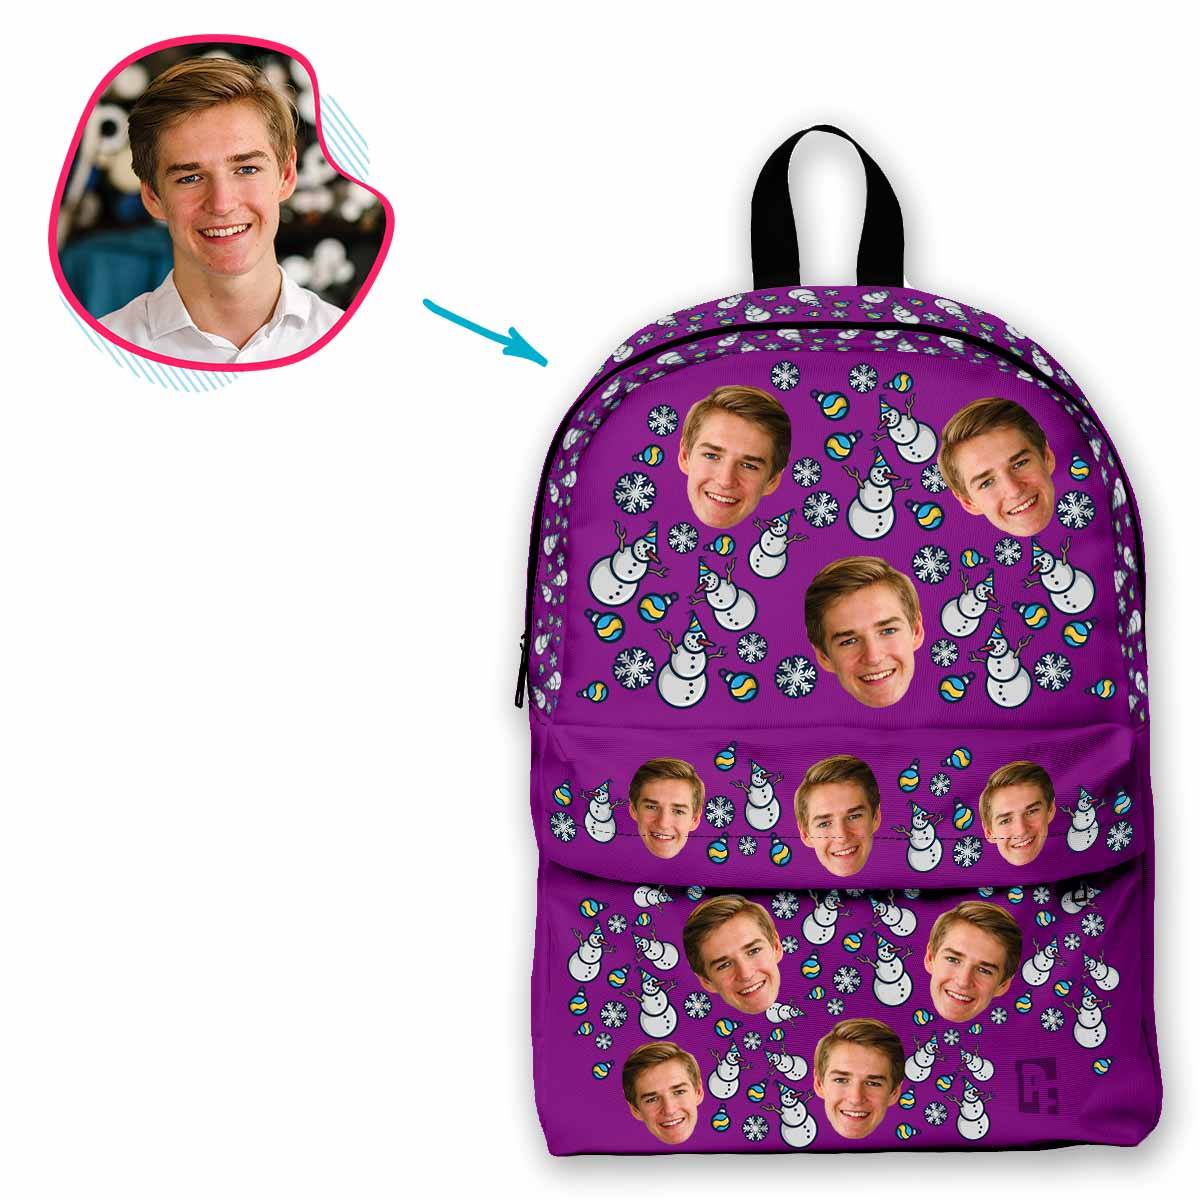 purple Snowman classic backpack personalized with photo of face printed on it